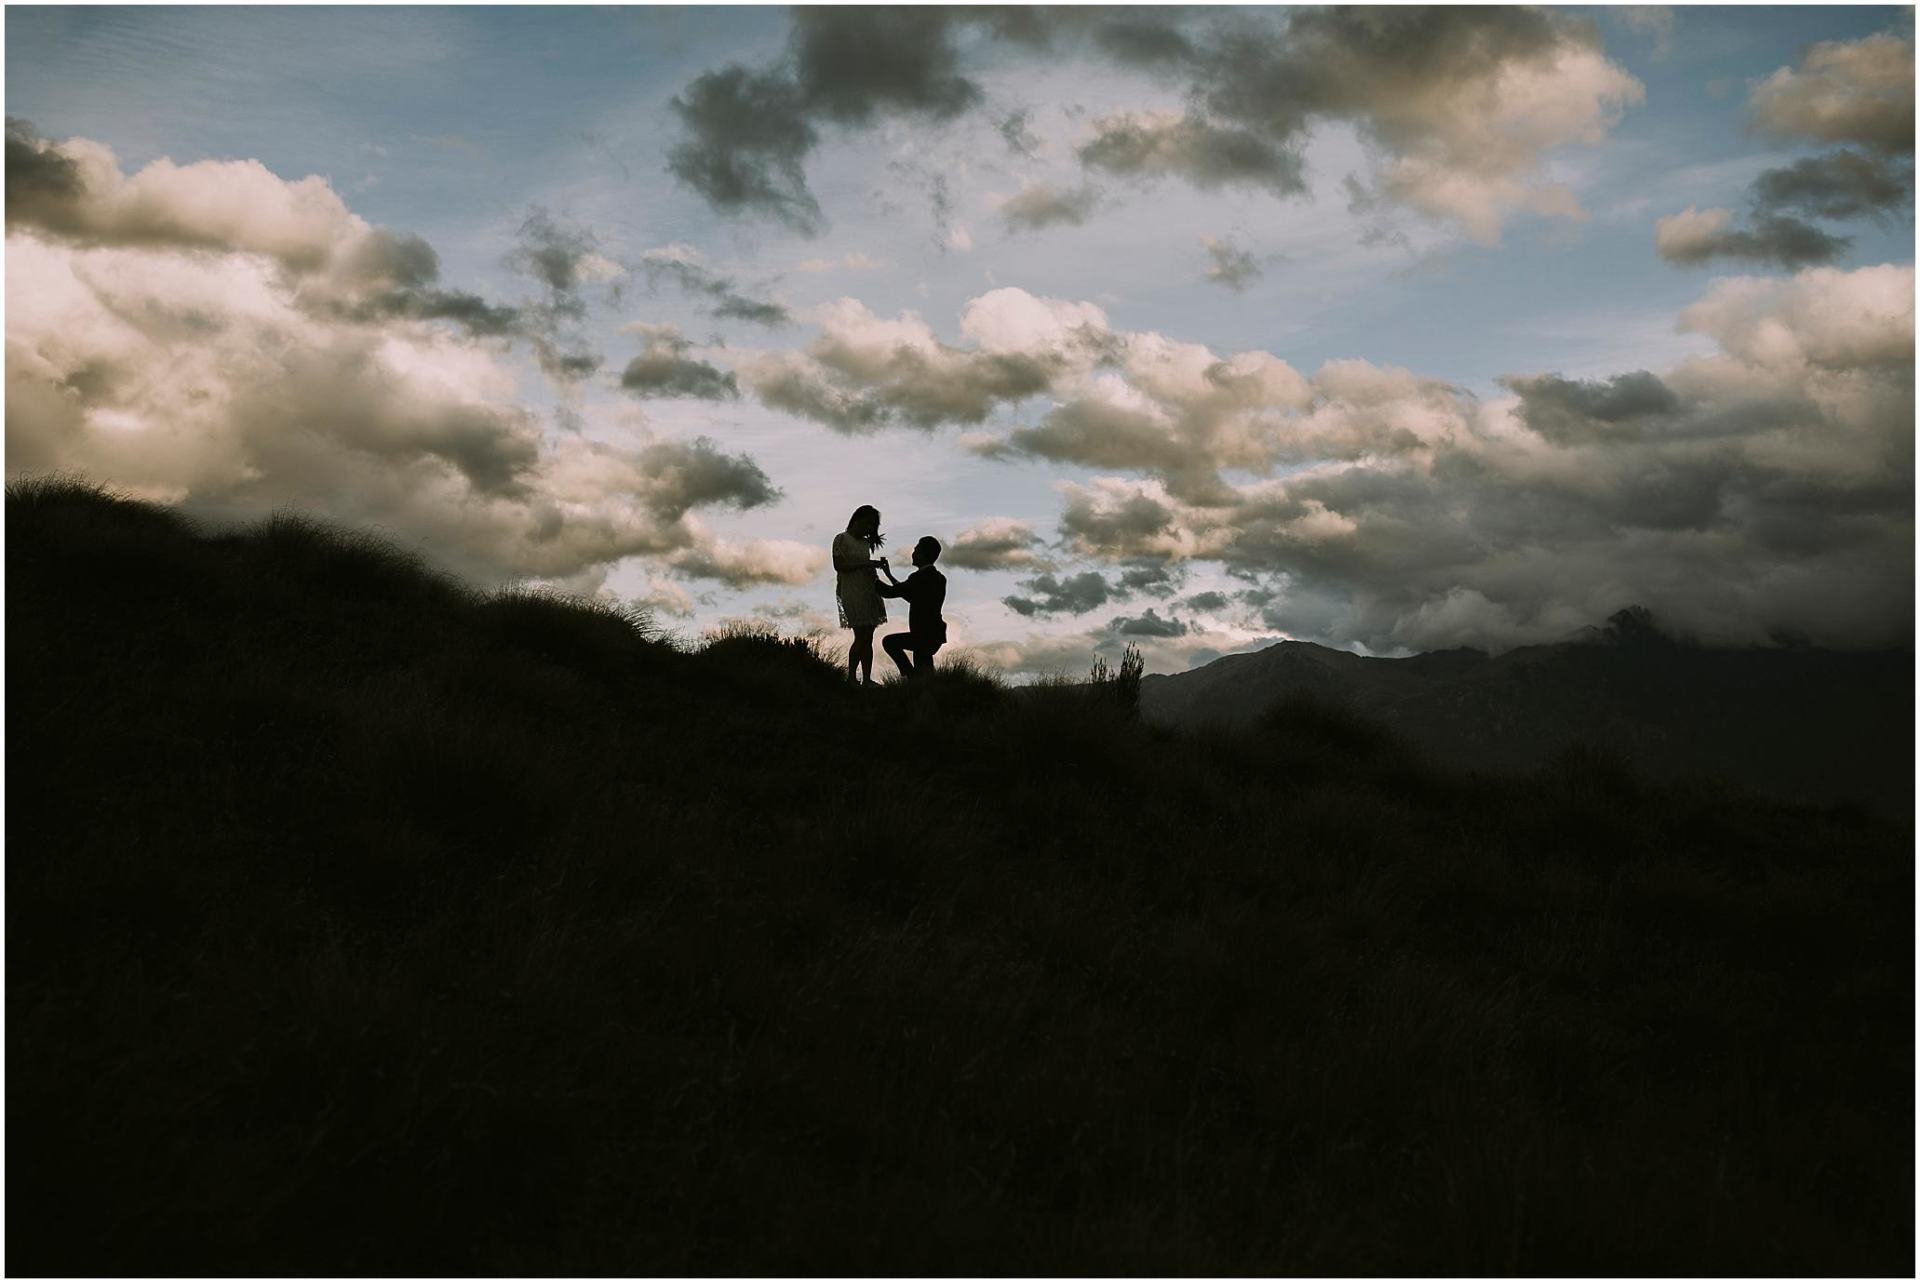 Charlotte Kiri Photography - Engagement Photography with a man kneeling proposing hopefully to his partner as they stand in silhouette on top of a mountain with moody grey and white clouds behind them in Wanaka, New Zealand